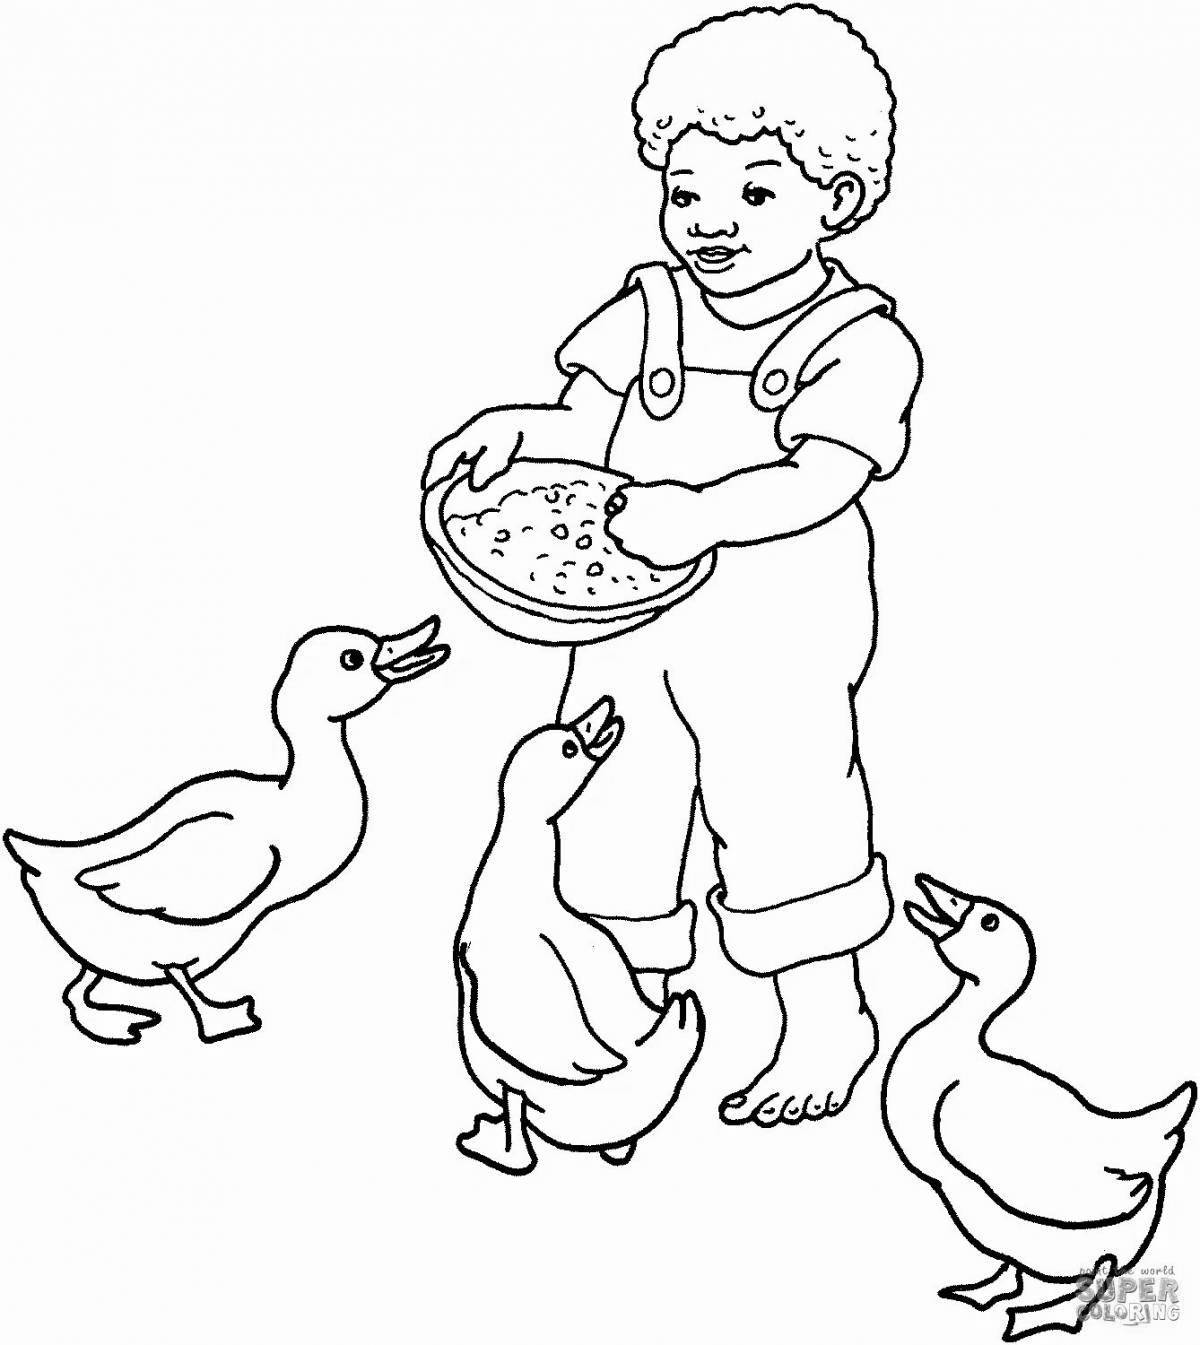 Coloring page wild boy feeding pigeons